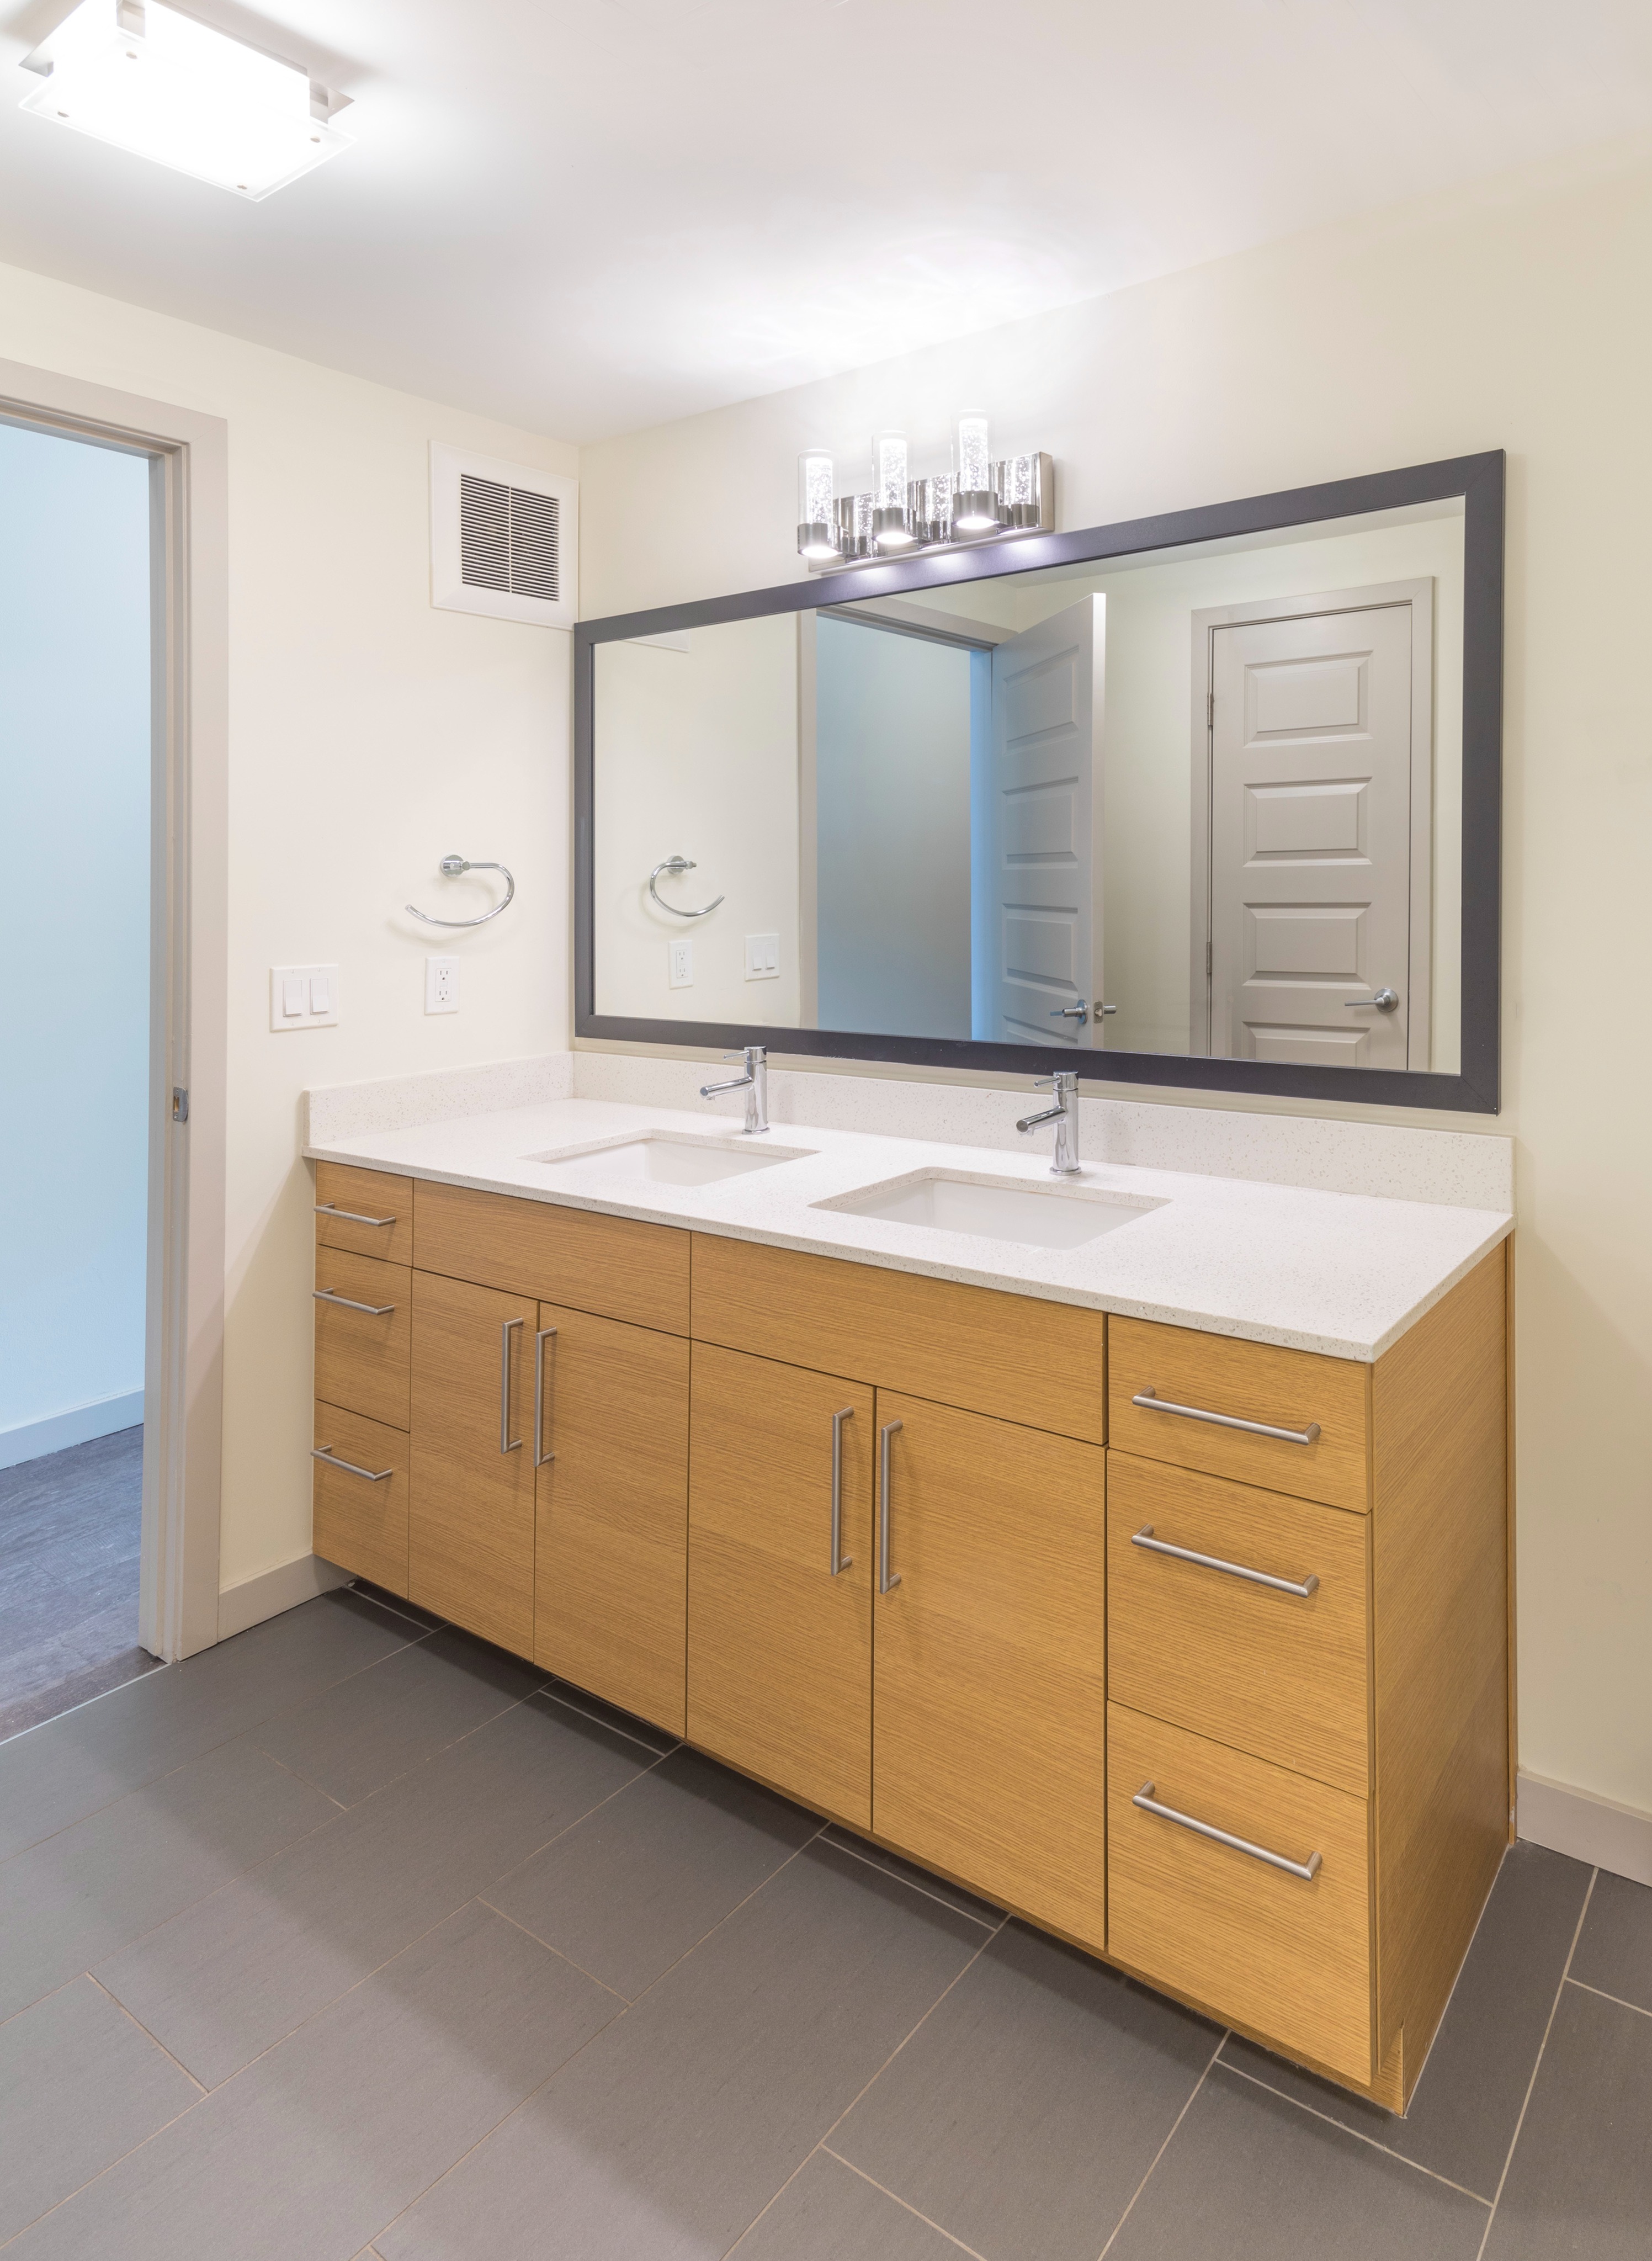 double-vanity bathroom at modera river north apartment homes for rent in denver colorado